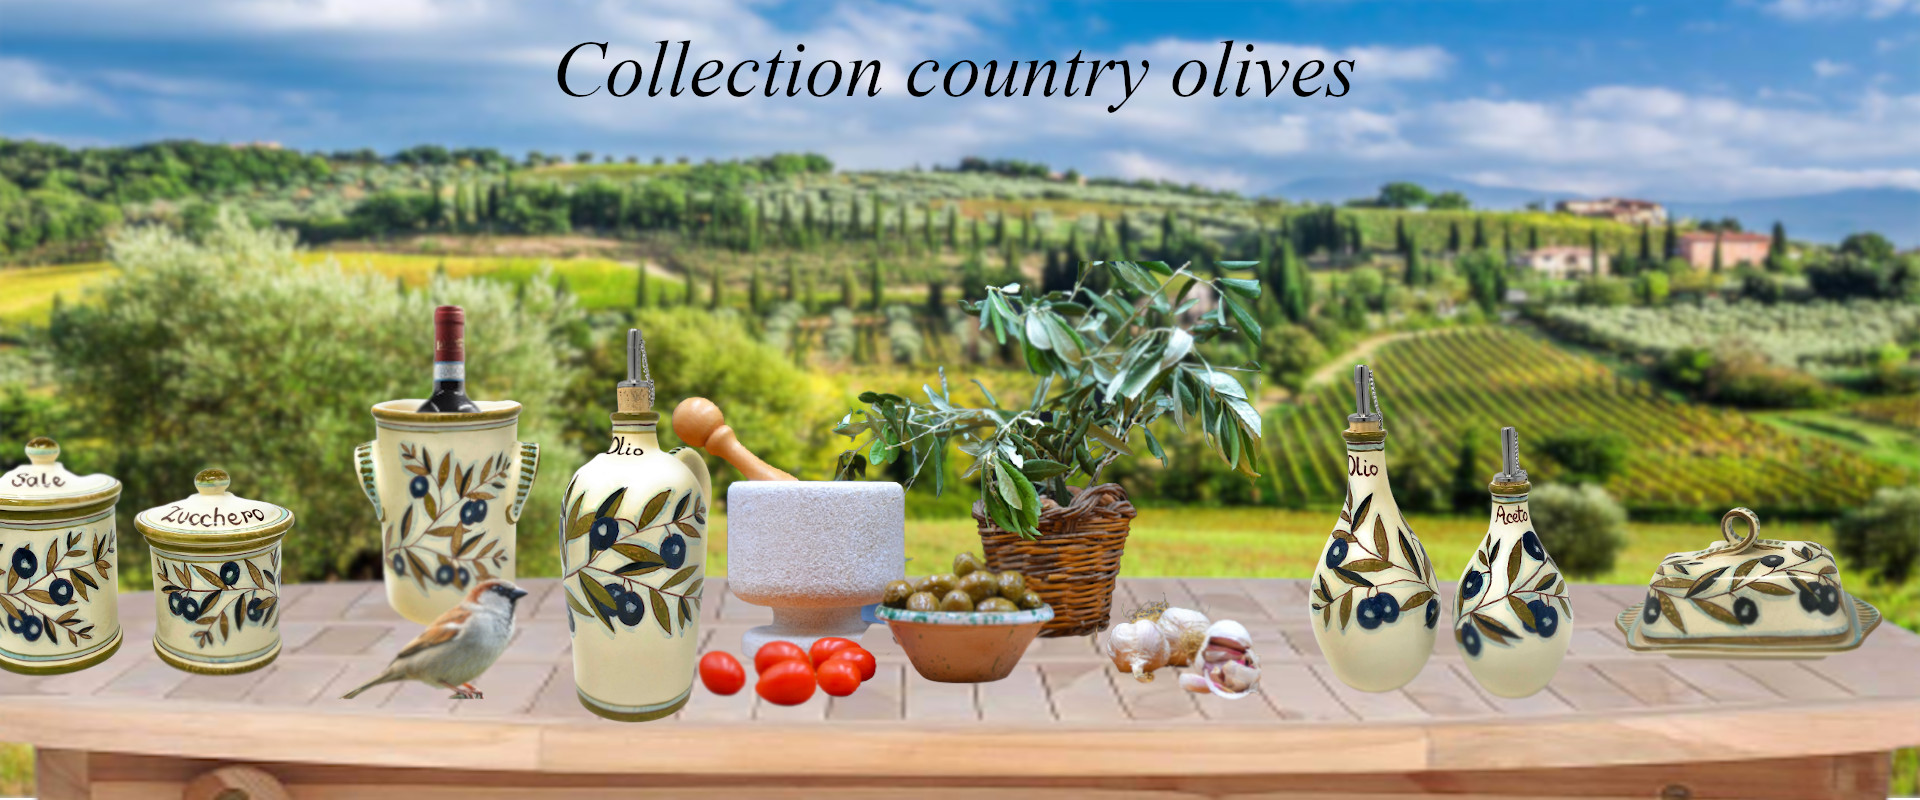 collection country olives